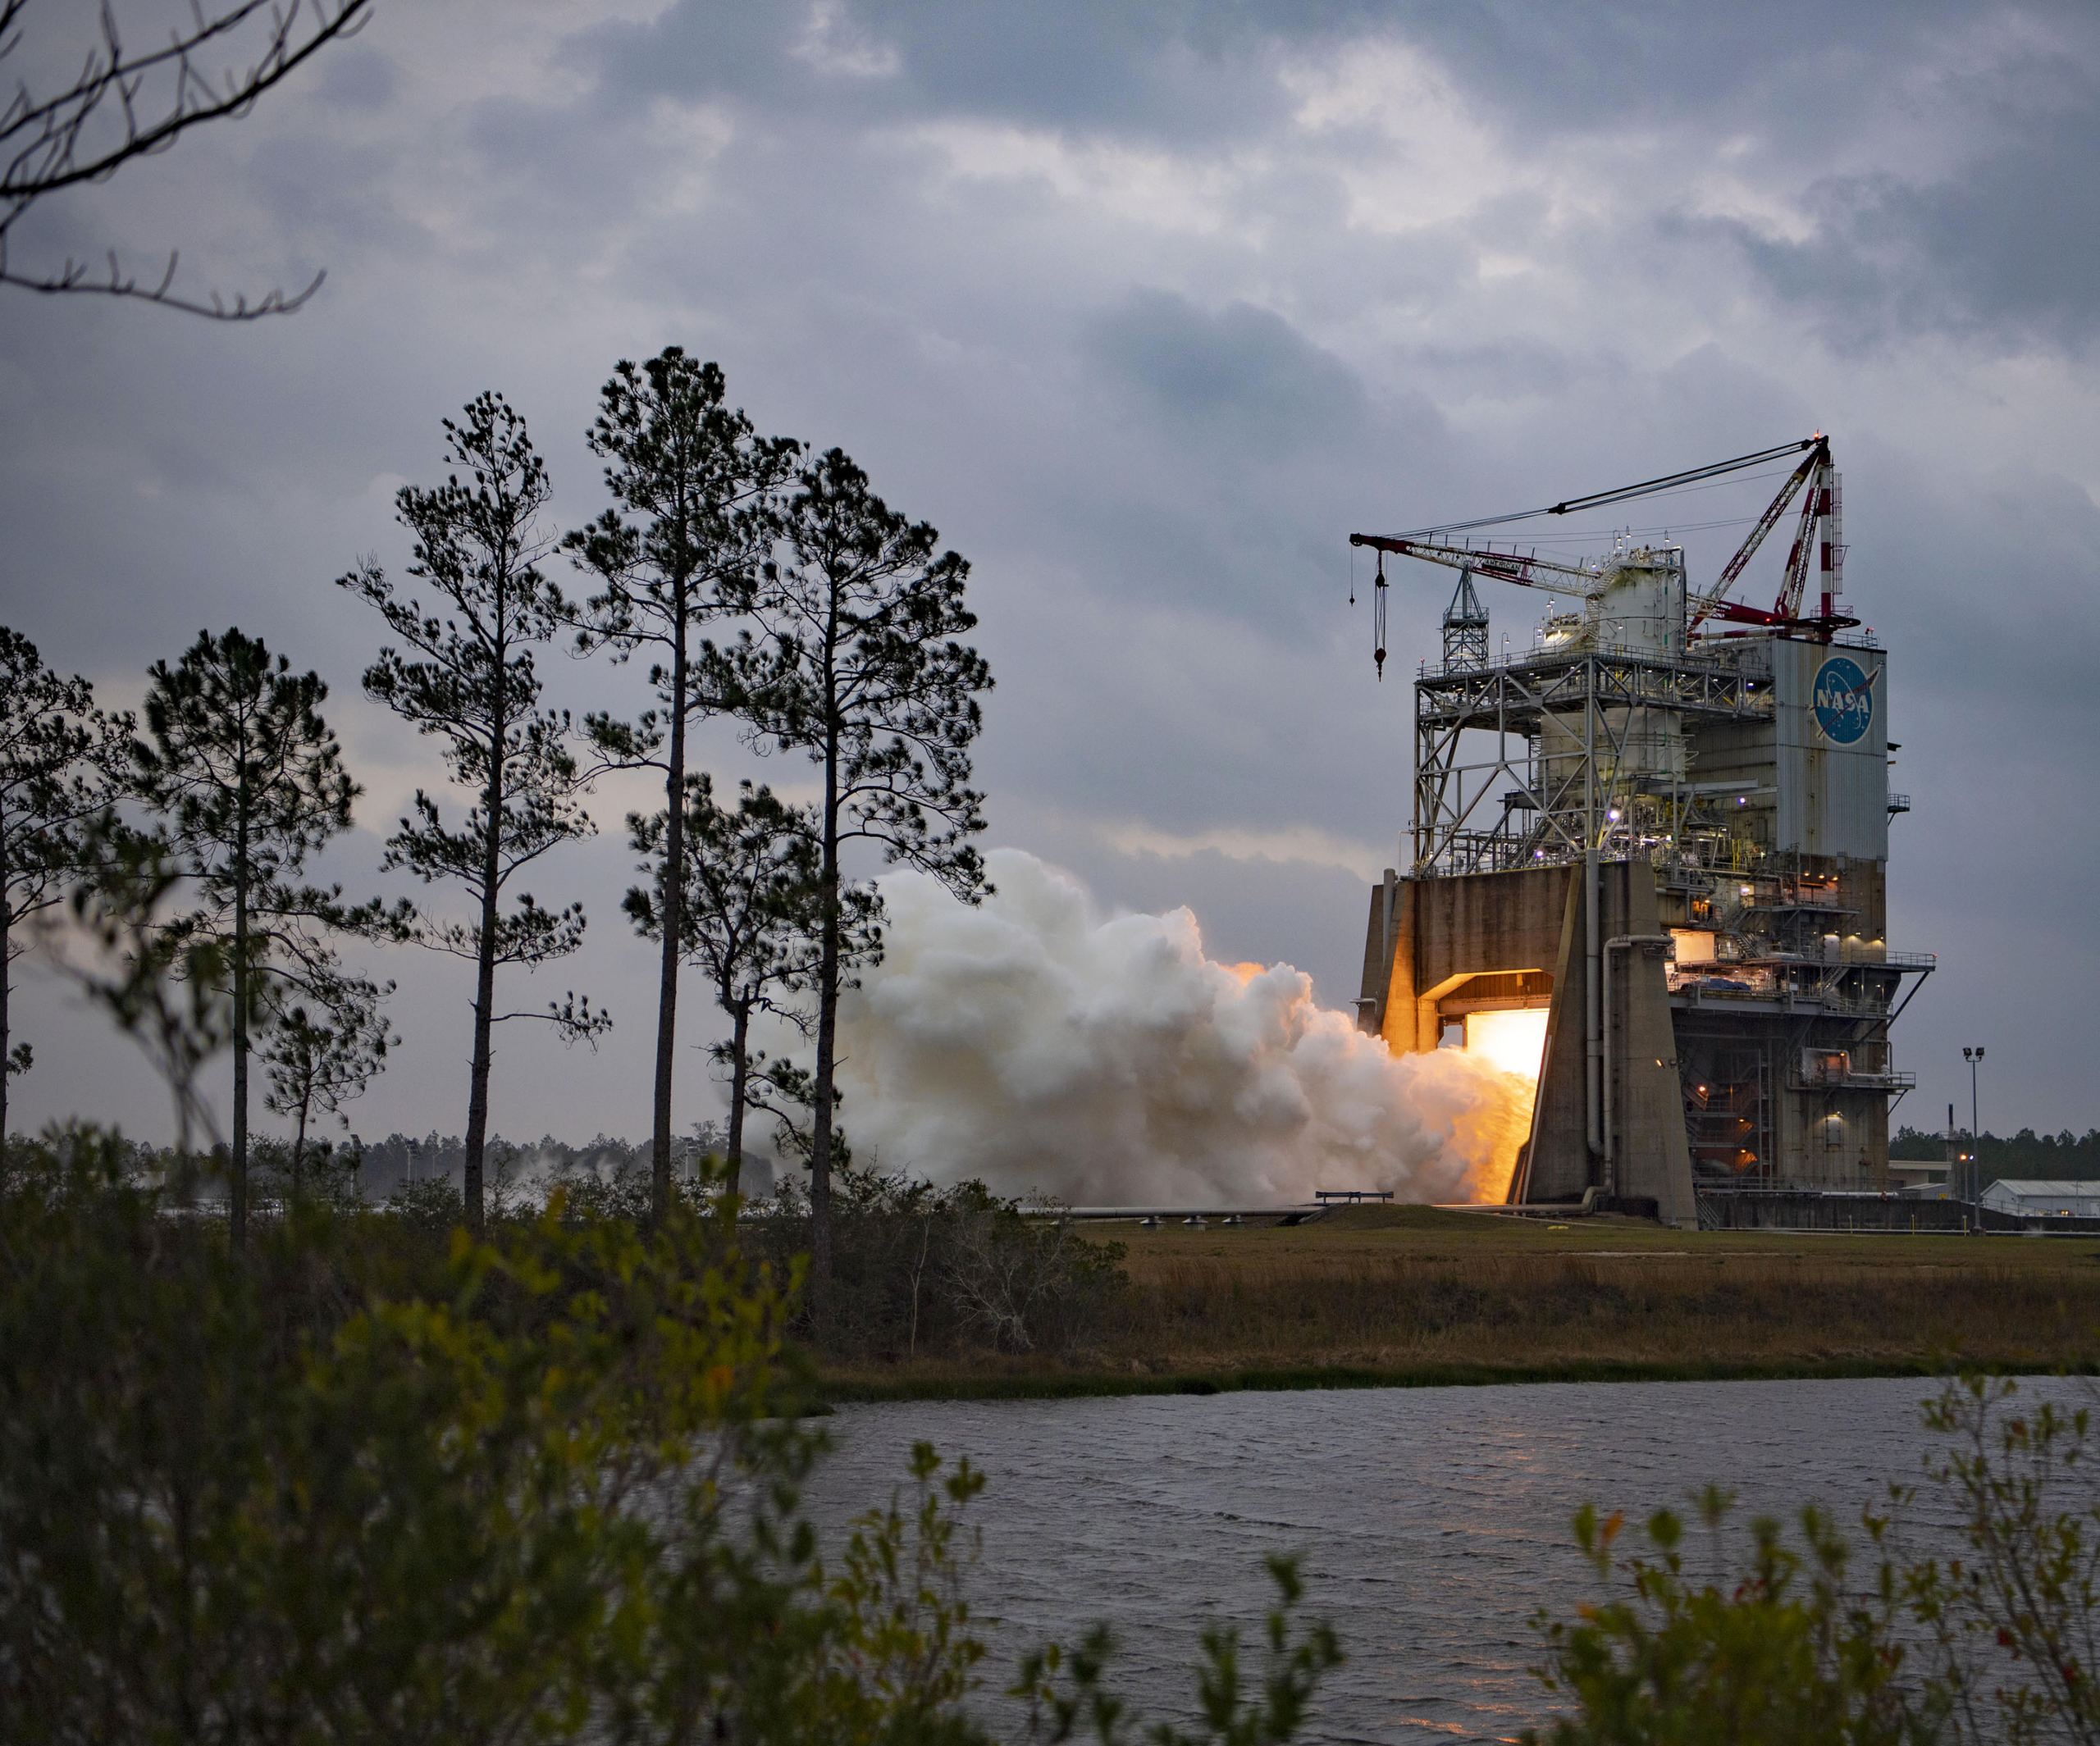 NASA Just Tested a new Engine That Will Launch Artemis V and Beyond